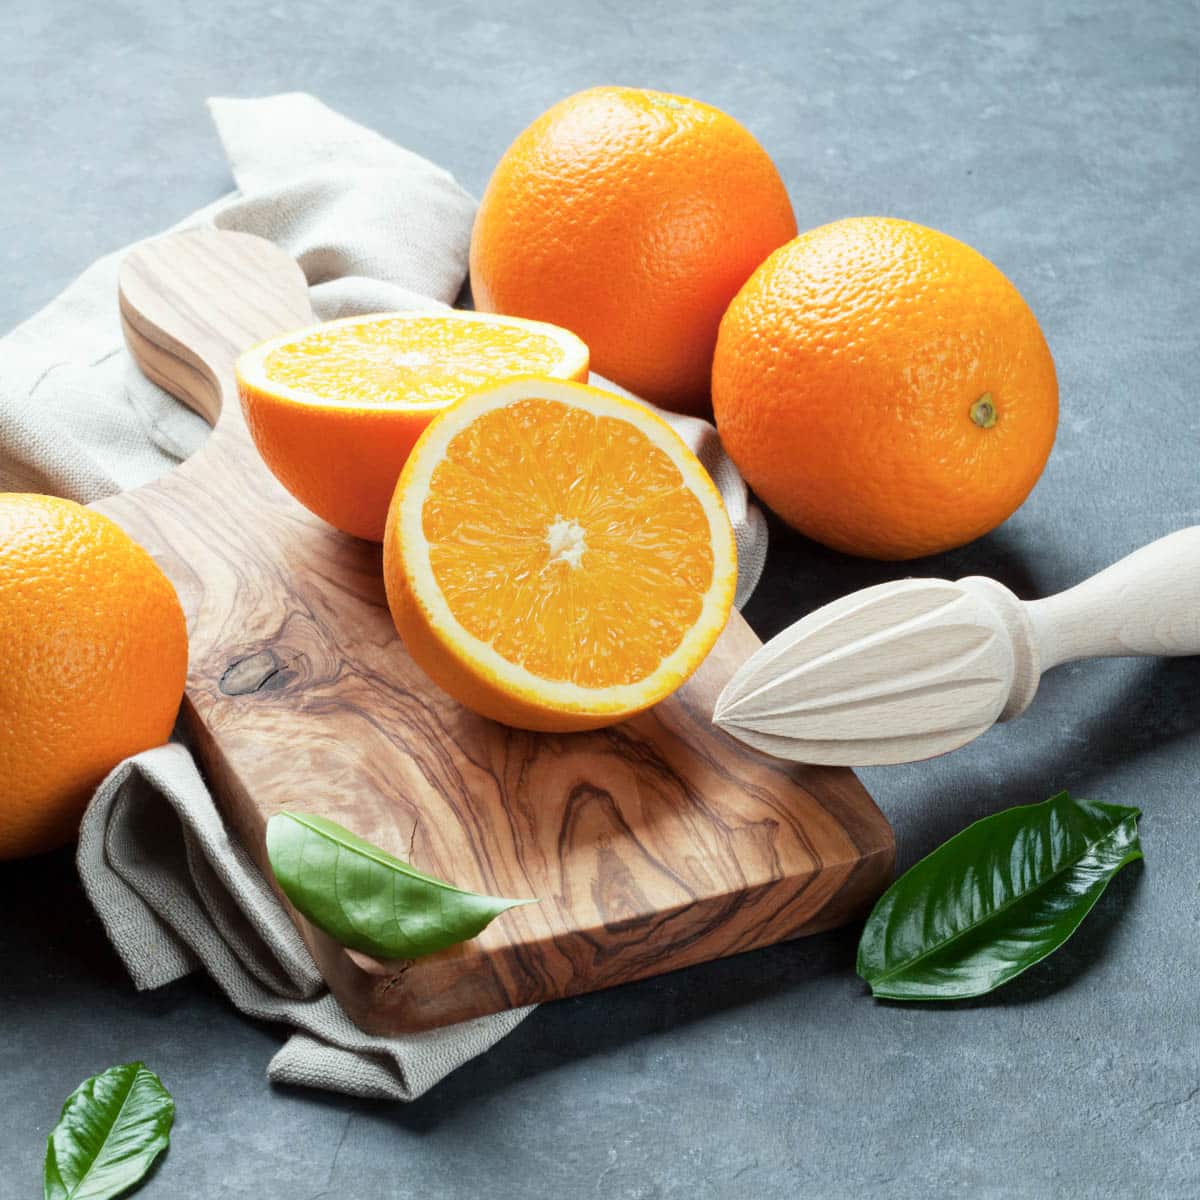 Fresh oranges on a cutting board with a wooden reamer.